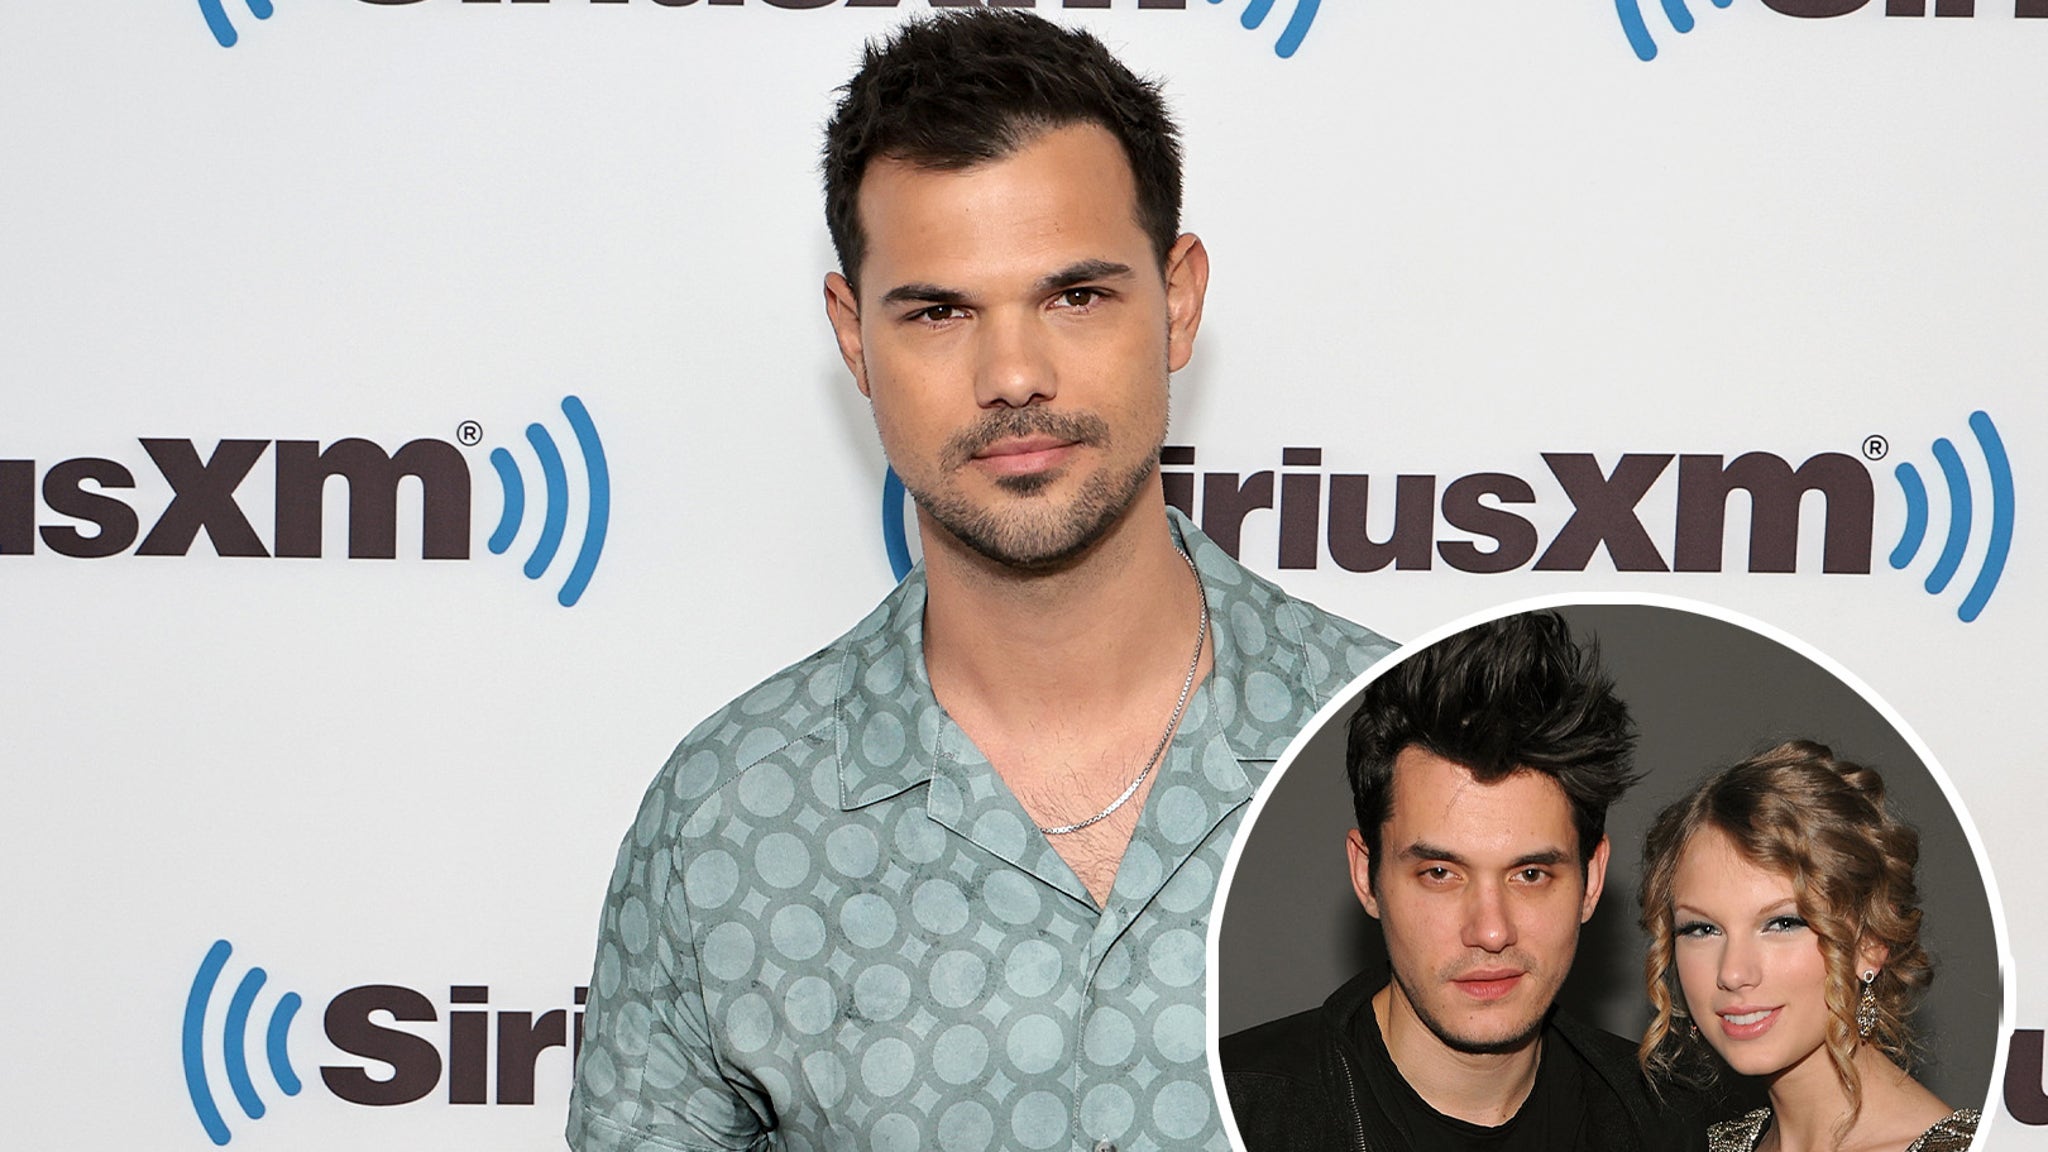 Taylor Lautner Explains 'Praying' For John Mayer Comment Ahead of Taylor Swift's Album Re-Release